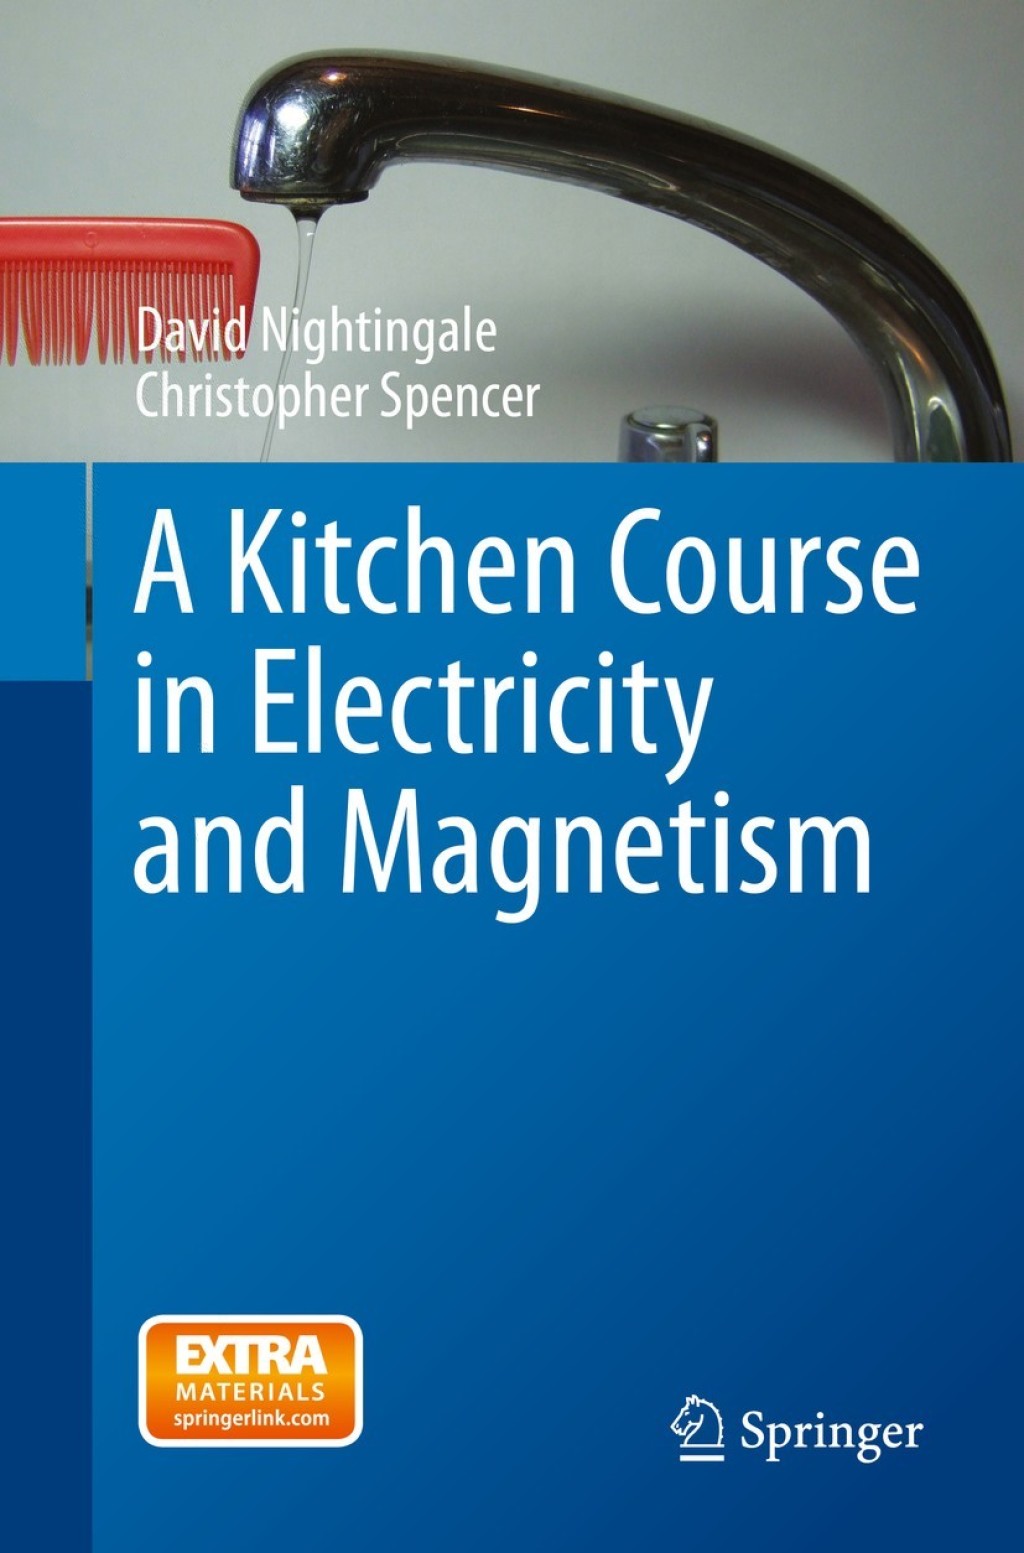 A Kitchen Course in Electricity and Magnetism (eBook) - David Nightingale; Christopher Spencer,